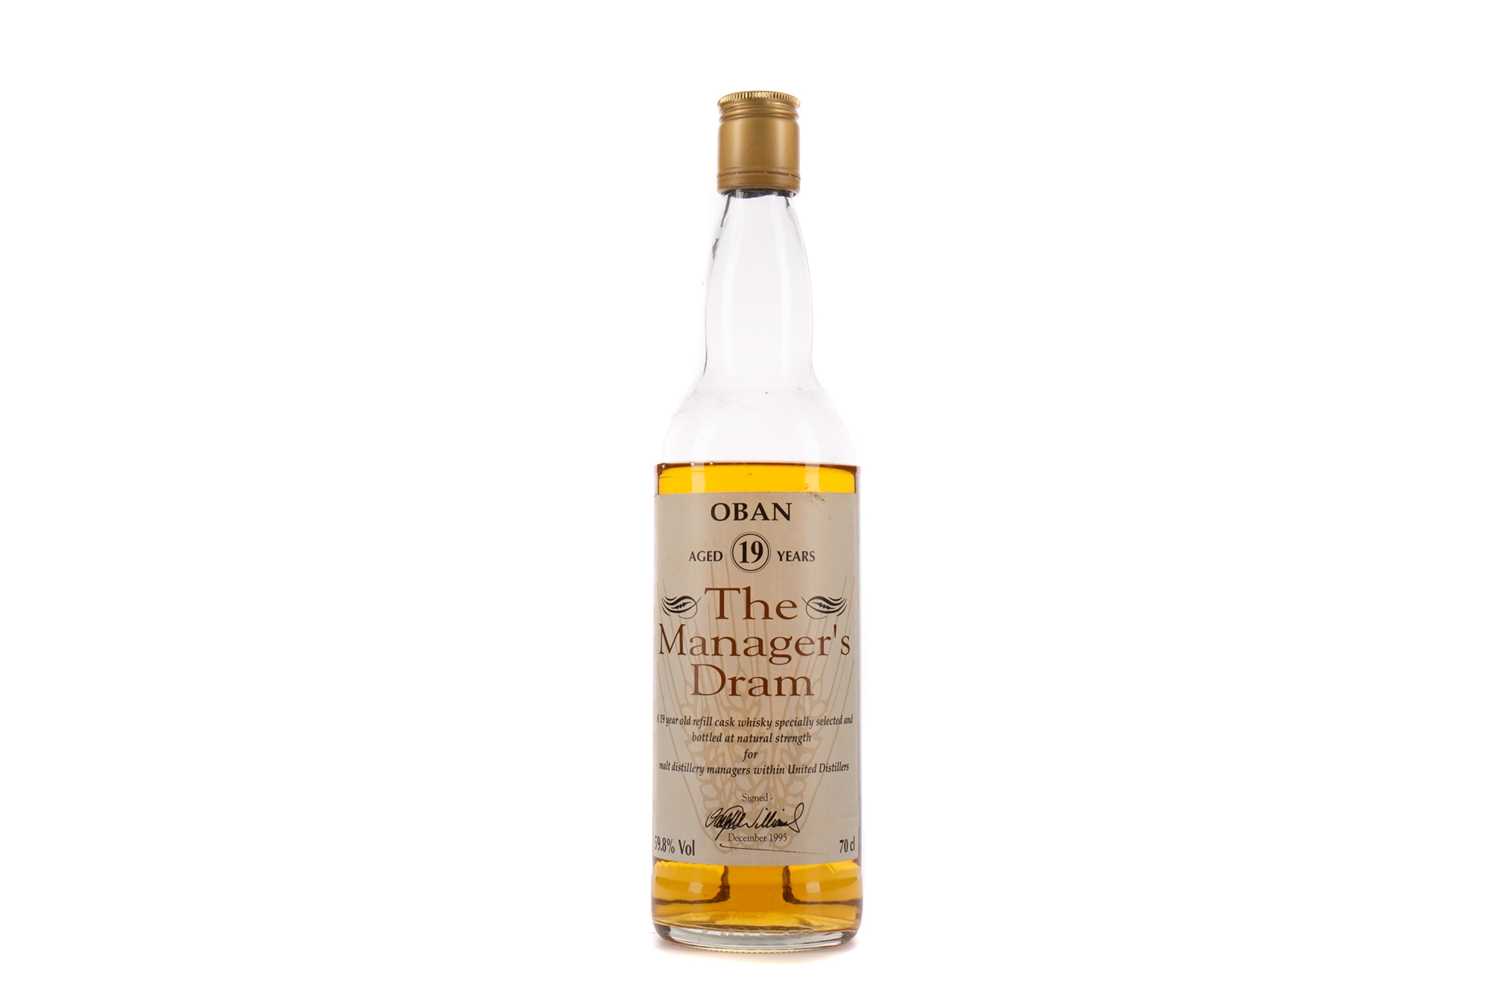 OBAN AGED 19 YEARS MANAGER'S DRAM - LOW FILL